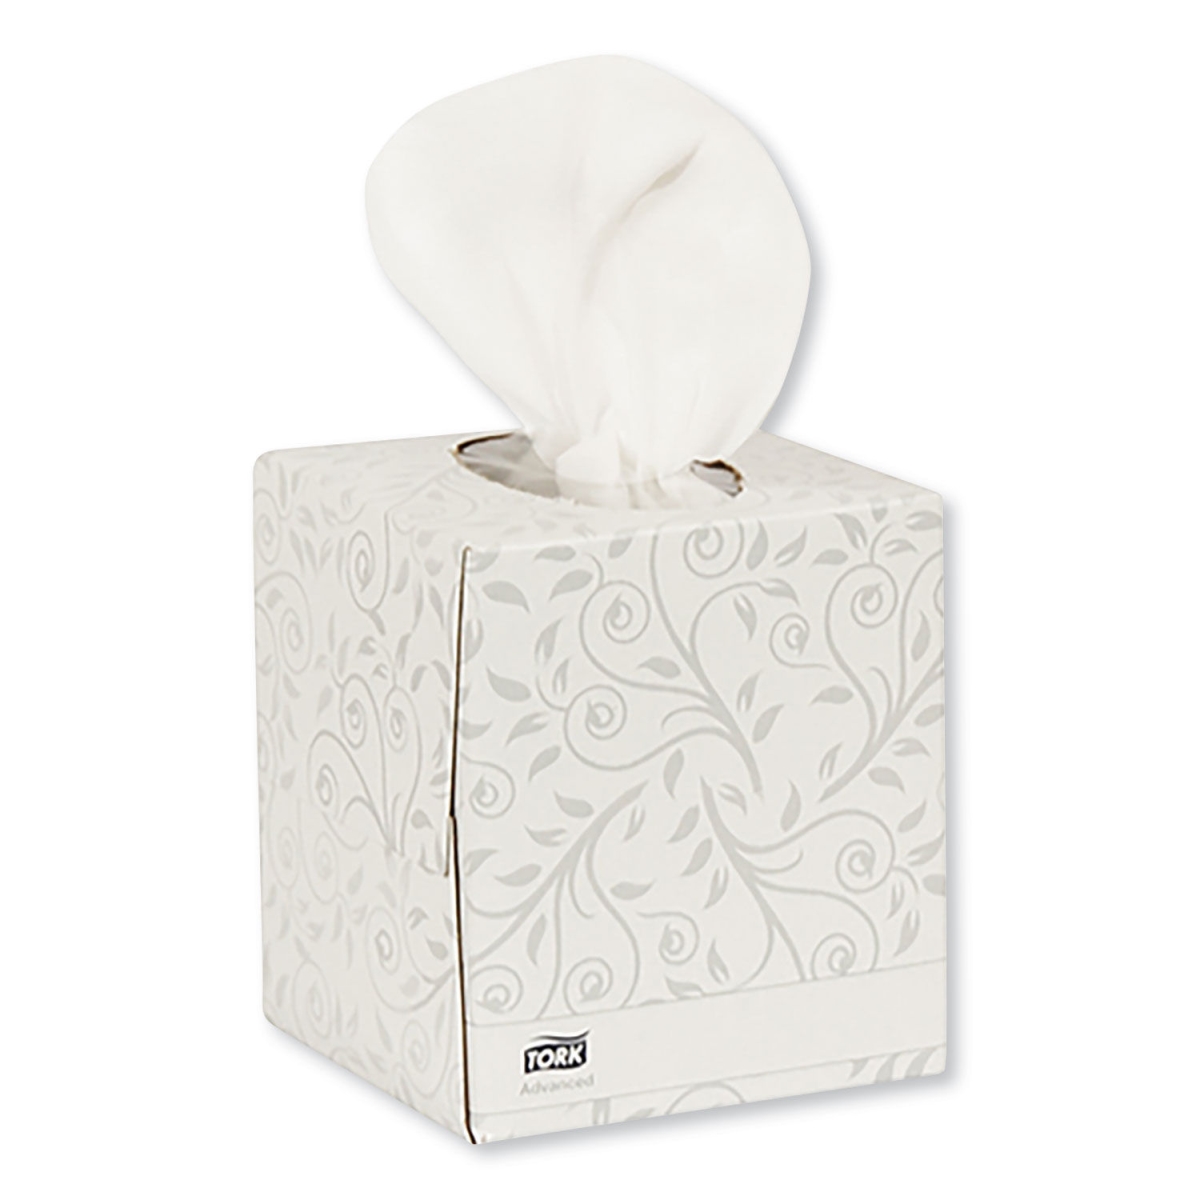 Picture of Essity TRKTF6830 Advanced Facial Tissue Cube, White